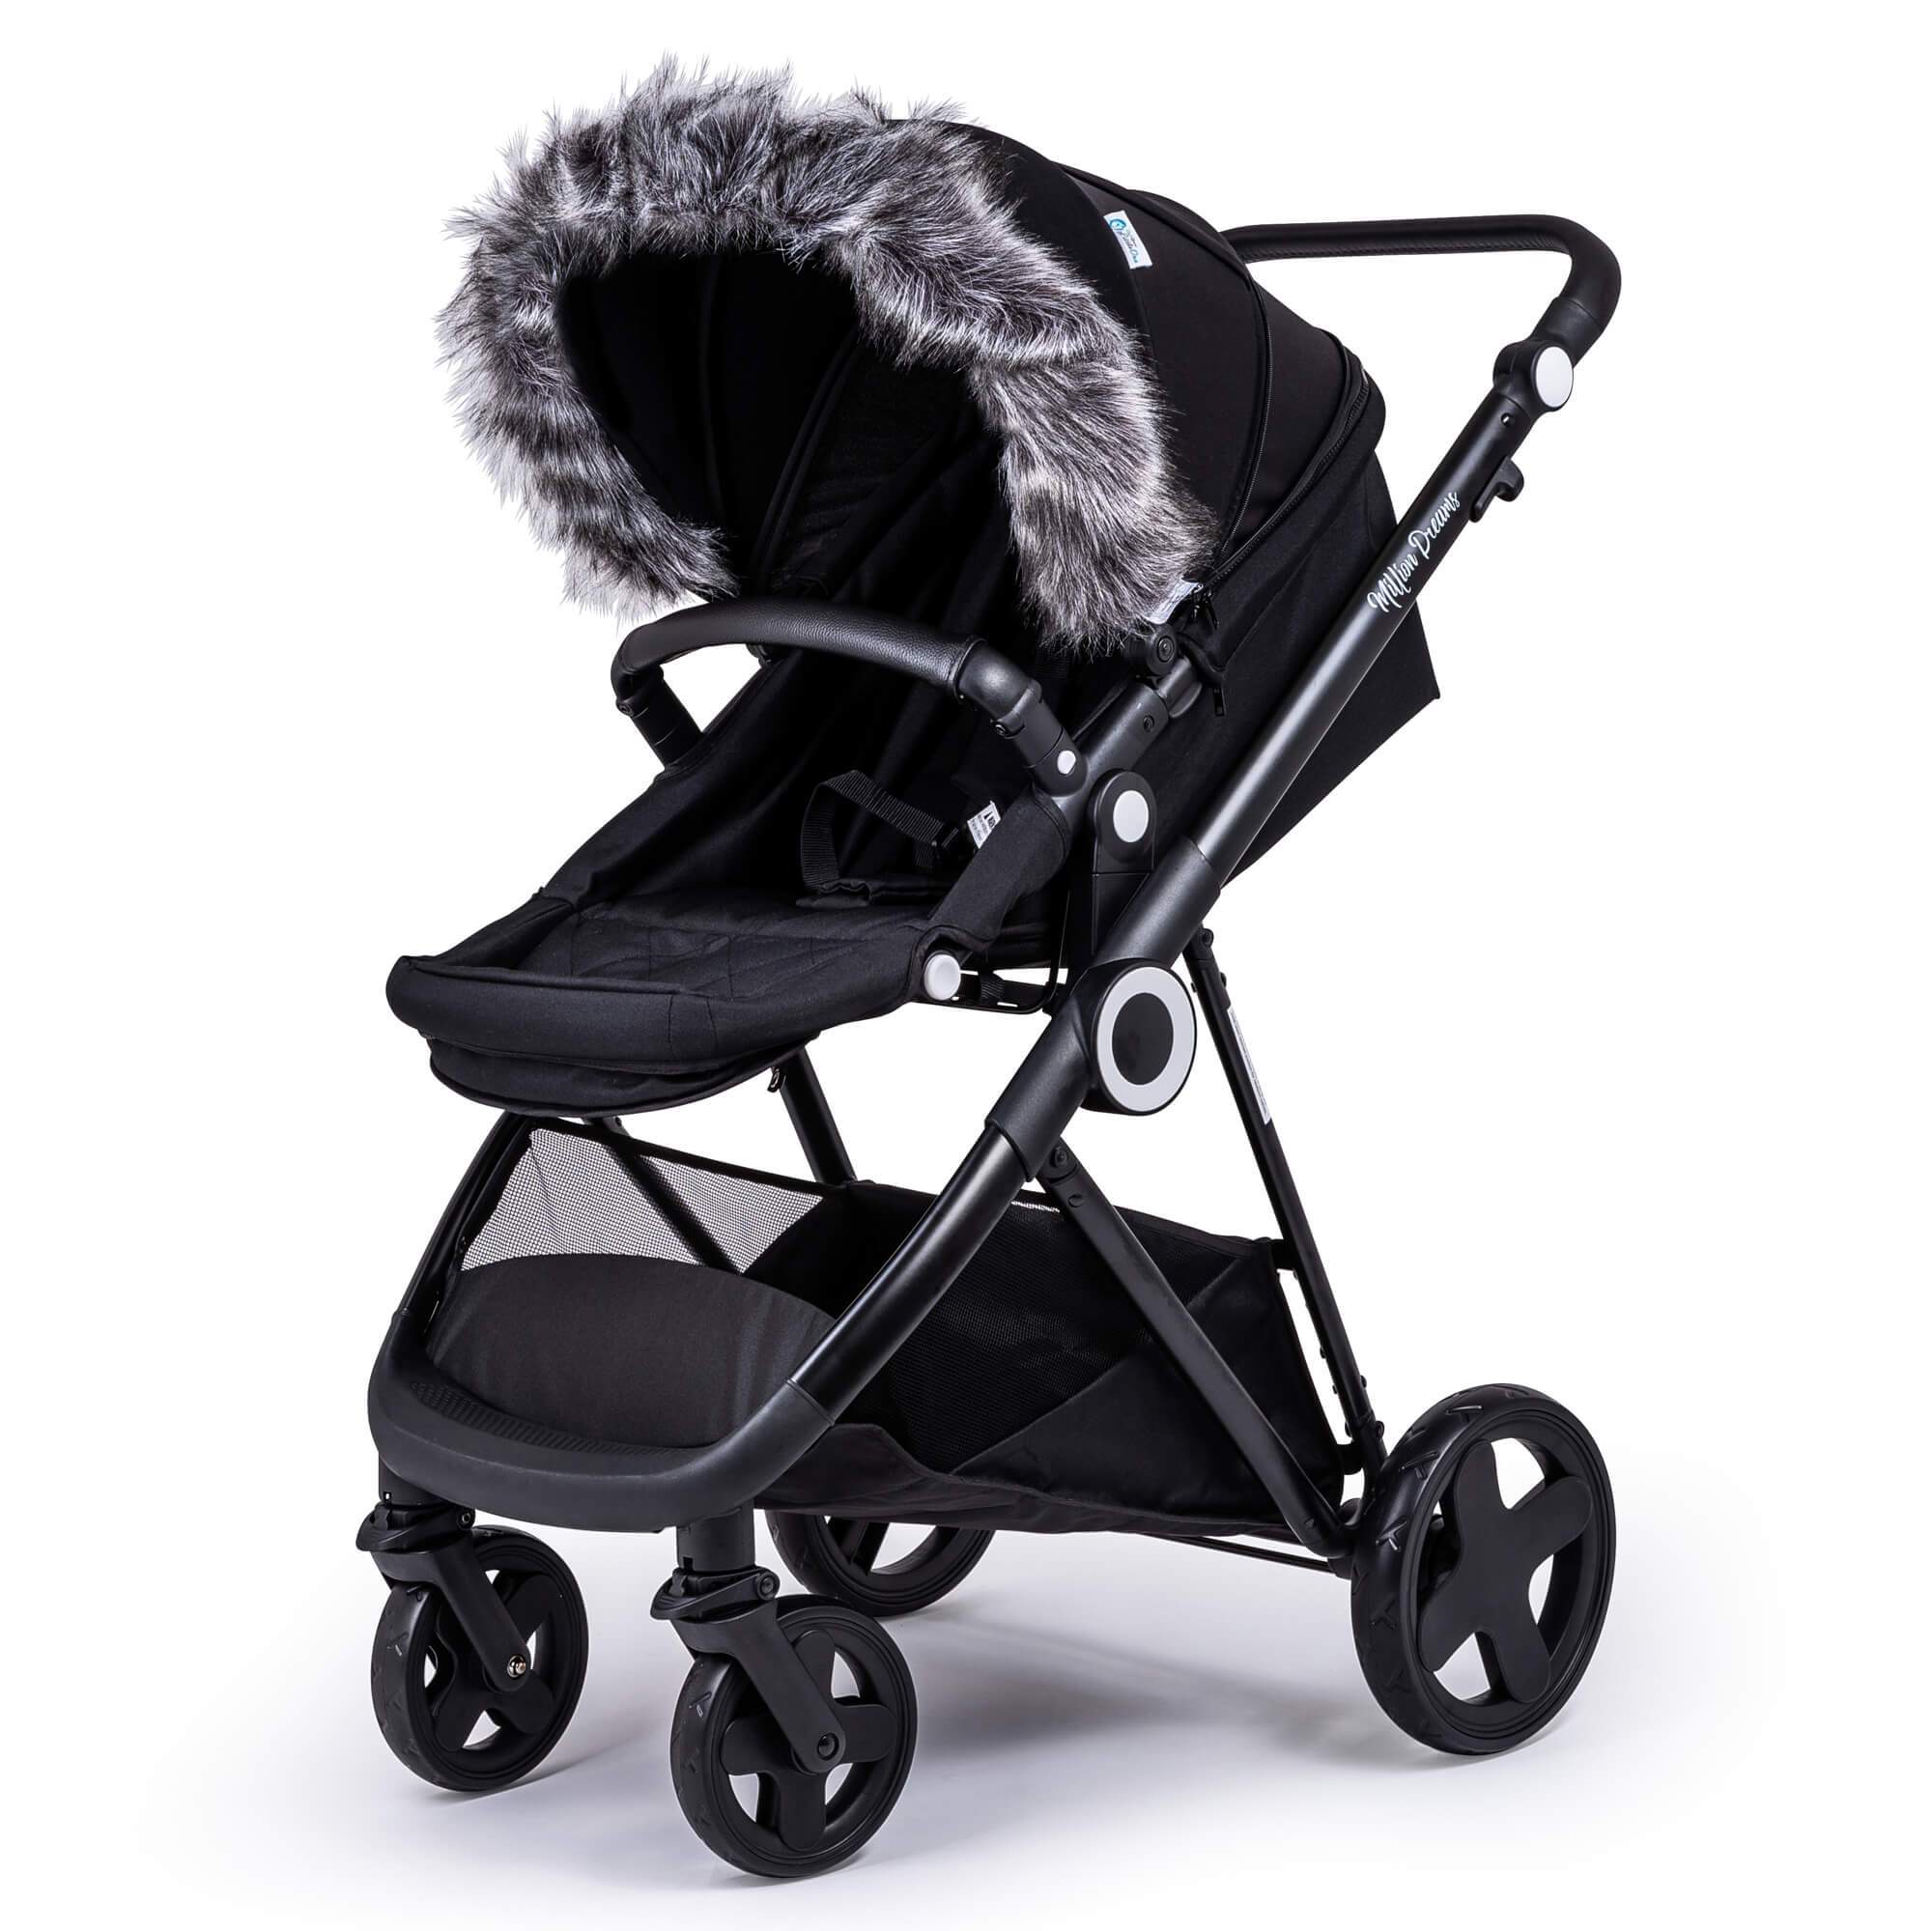 Pram Fur Hood Trim Attachment for Pushchair Compatible with Bebe Confort - Dark Grey / Fits All Models | For Your Little One